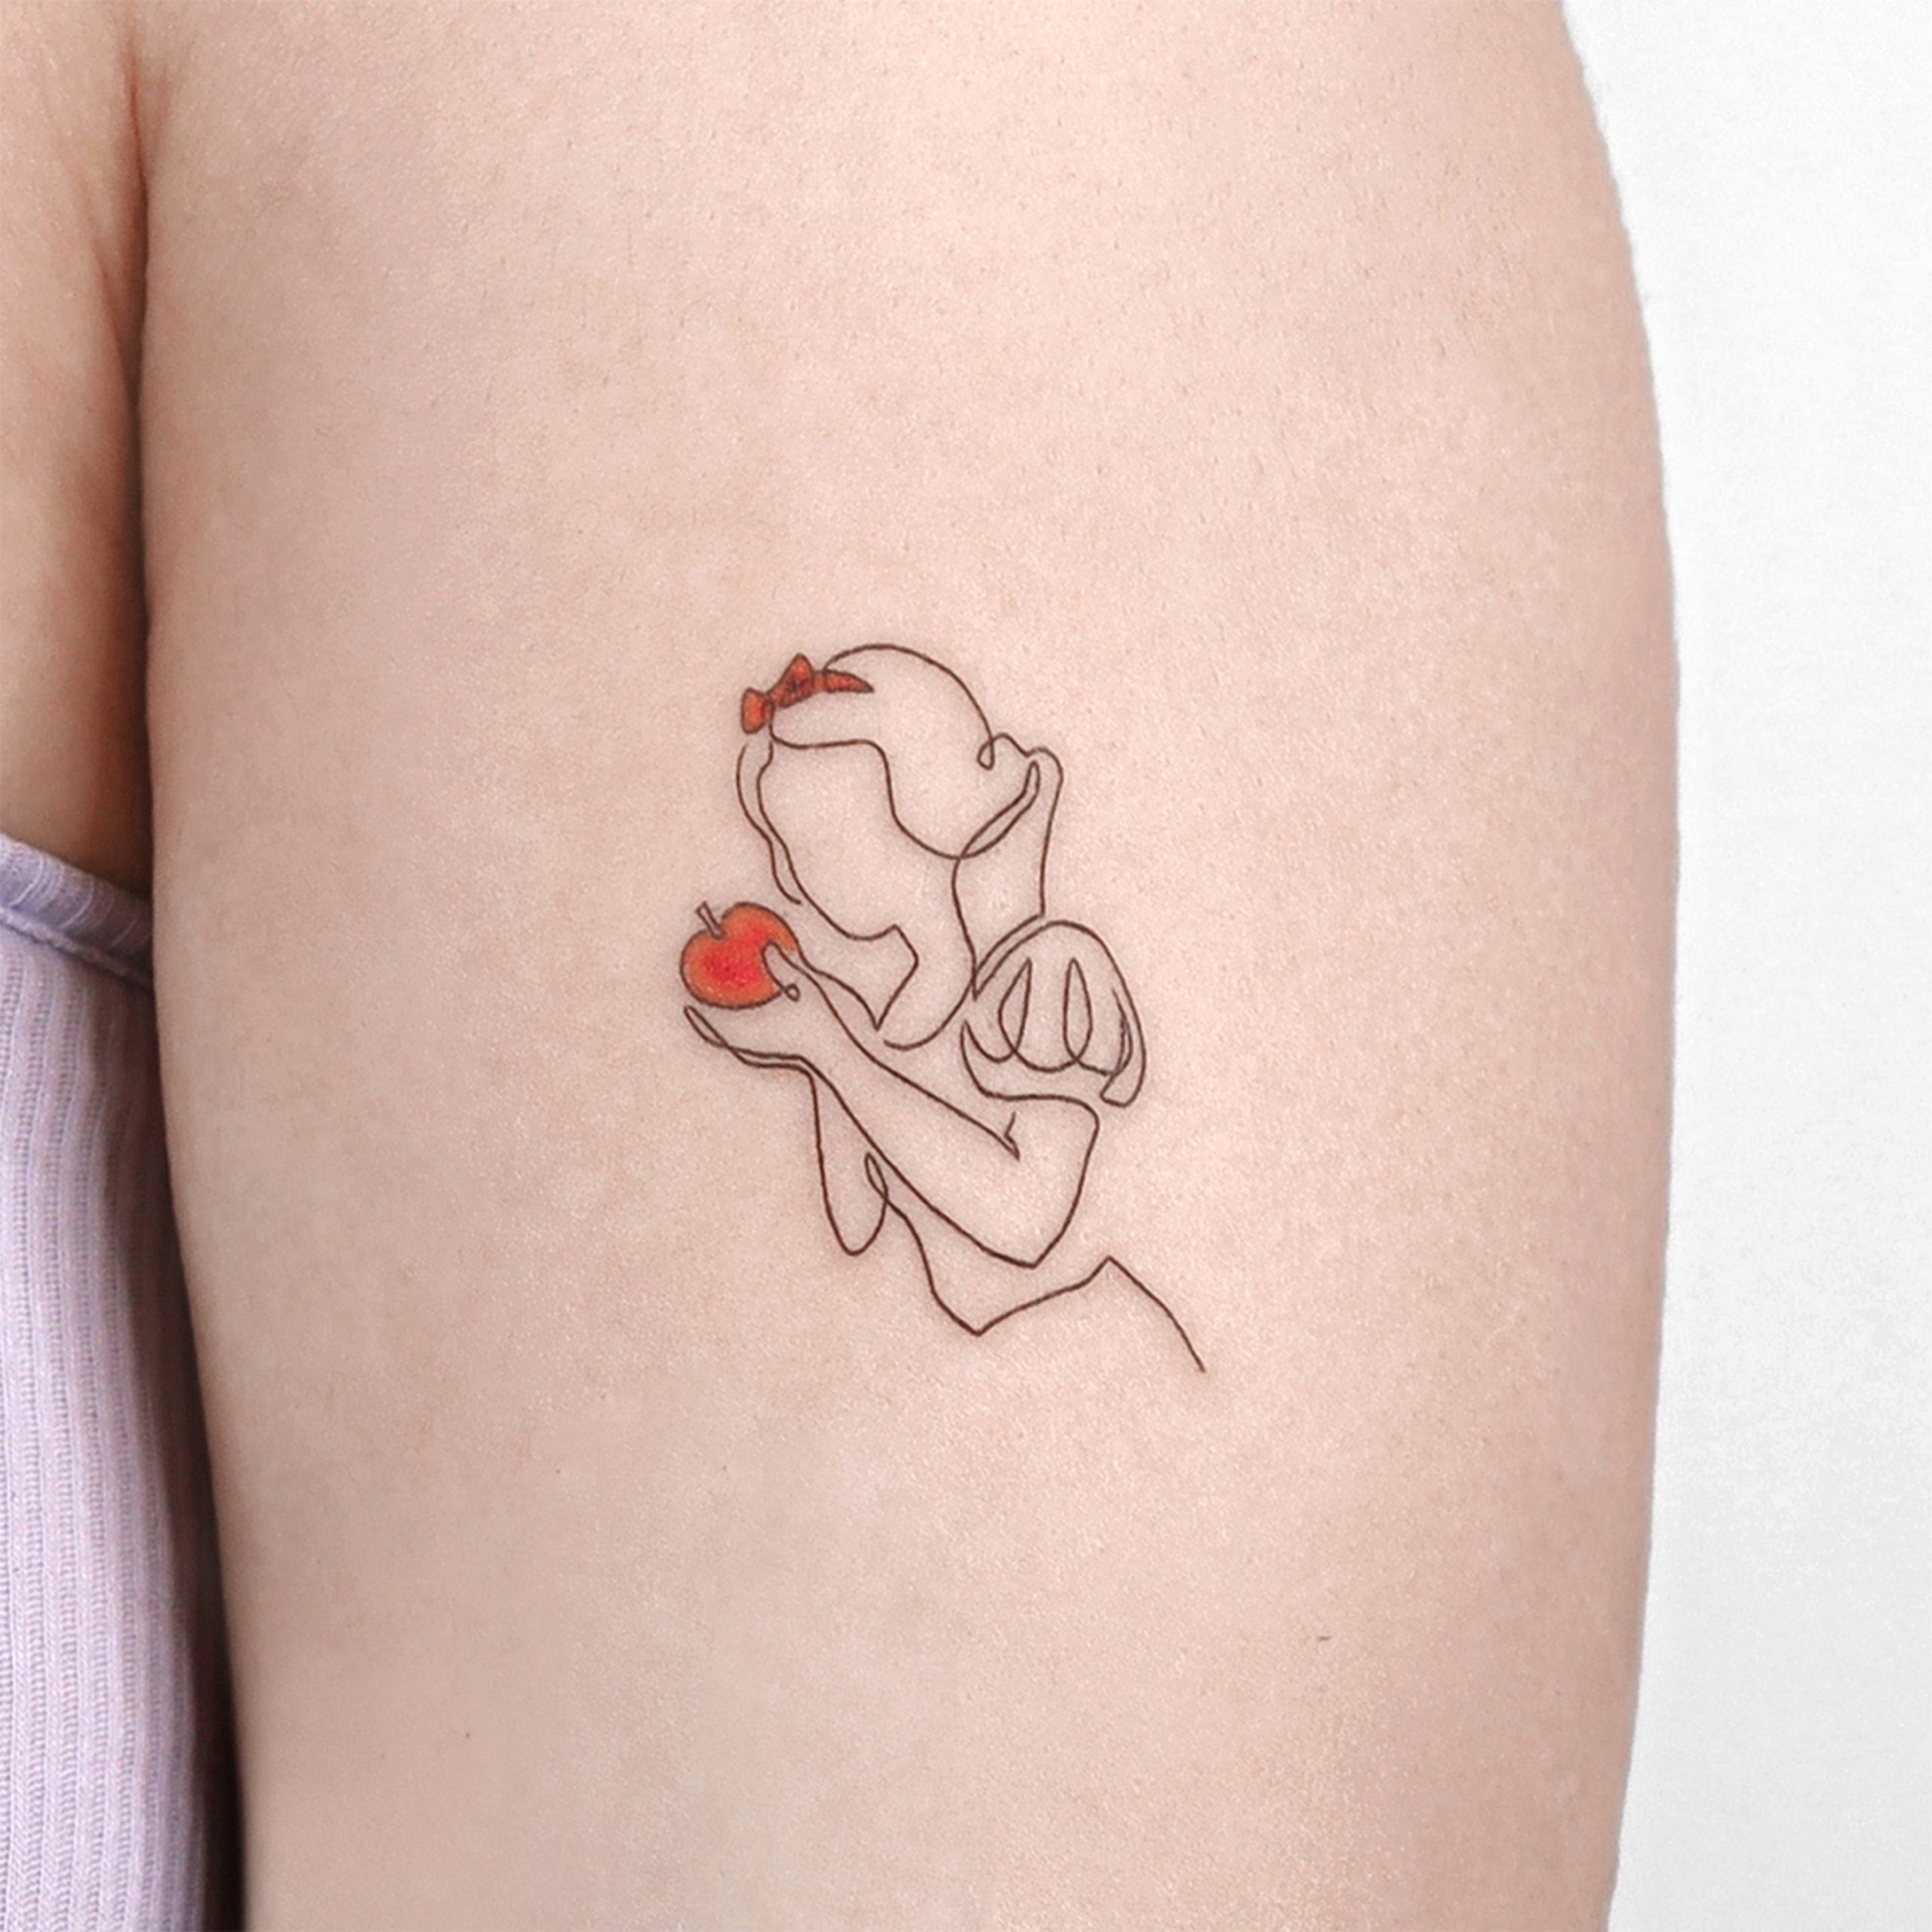 95 Single-Line Tattoos That Are Pure Perfection | Bored Panda